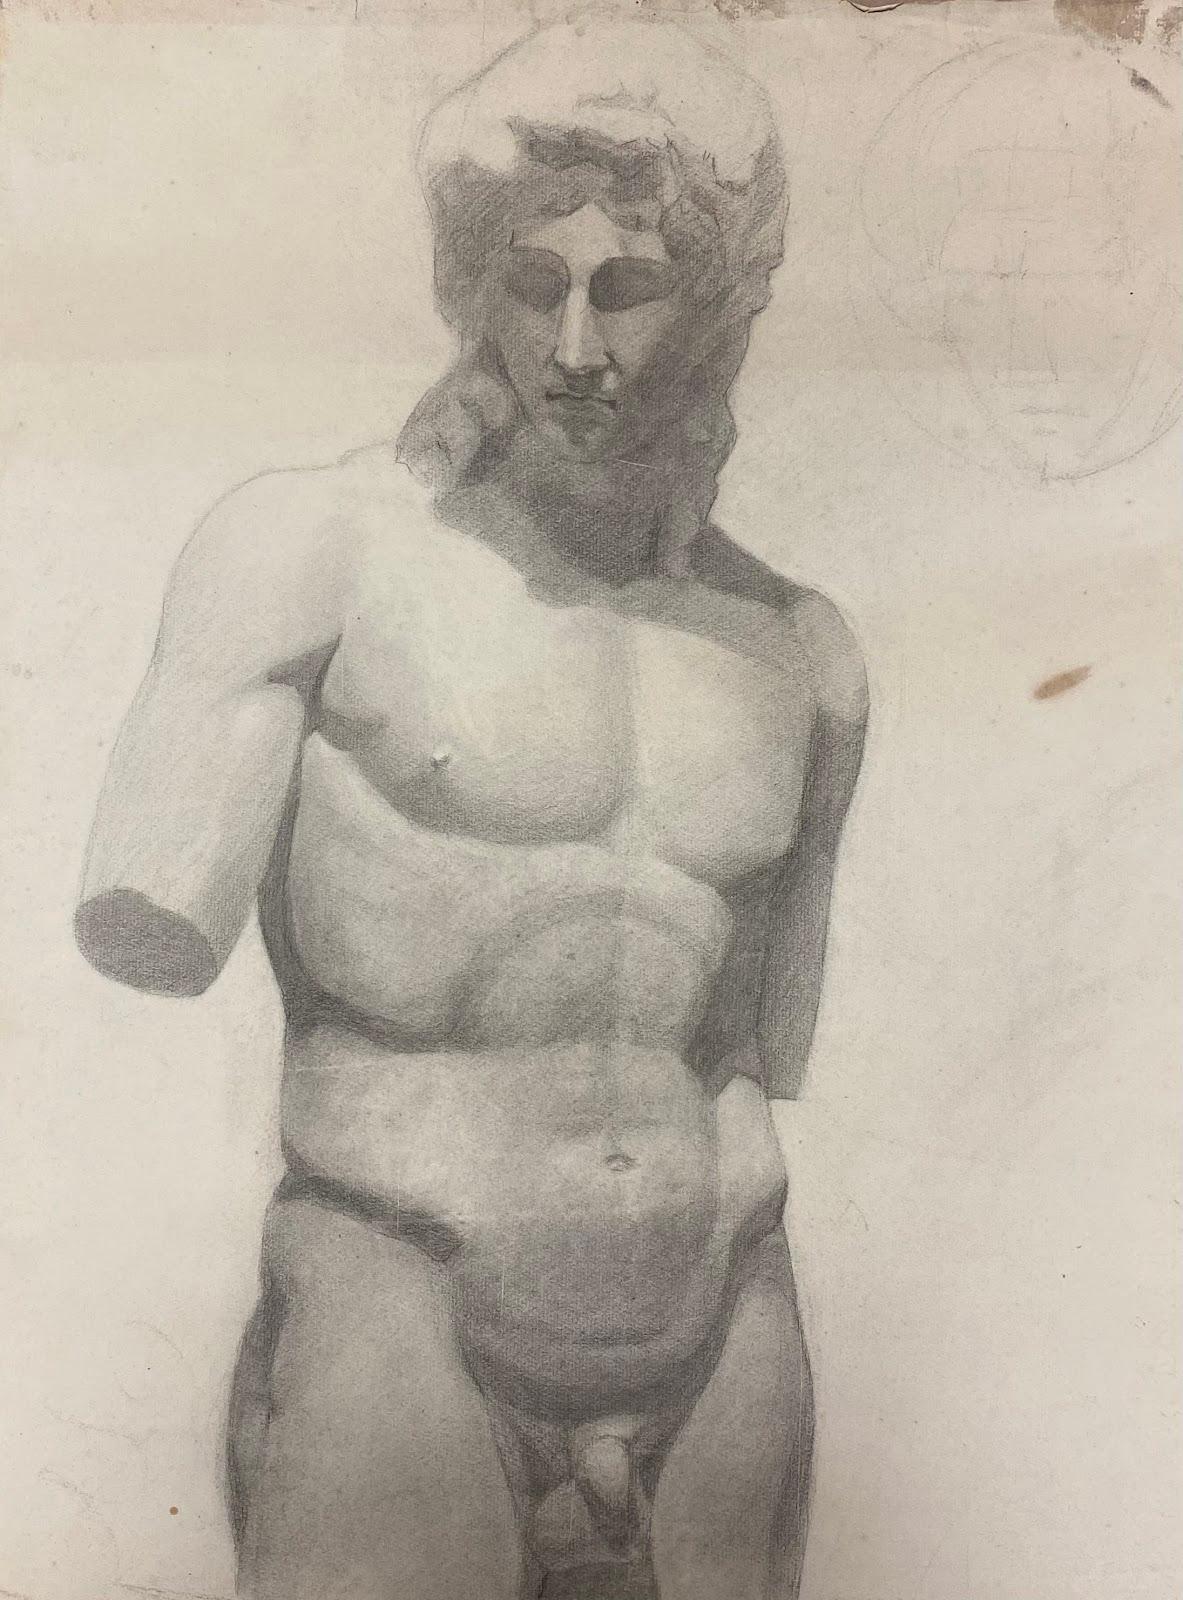 1900s Life Drawing Of A Sculpture Depicting a Nude Male Stood In Contraposto - Art by Jeanne Nachat